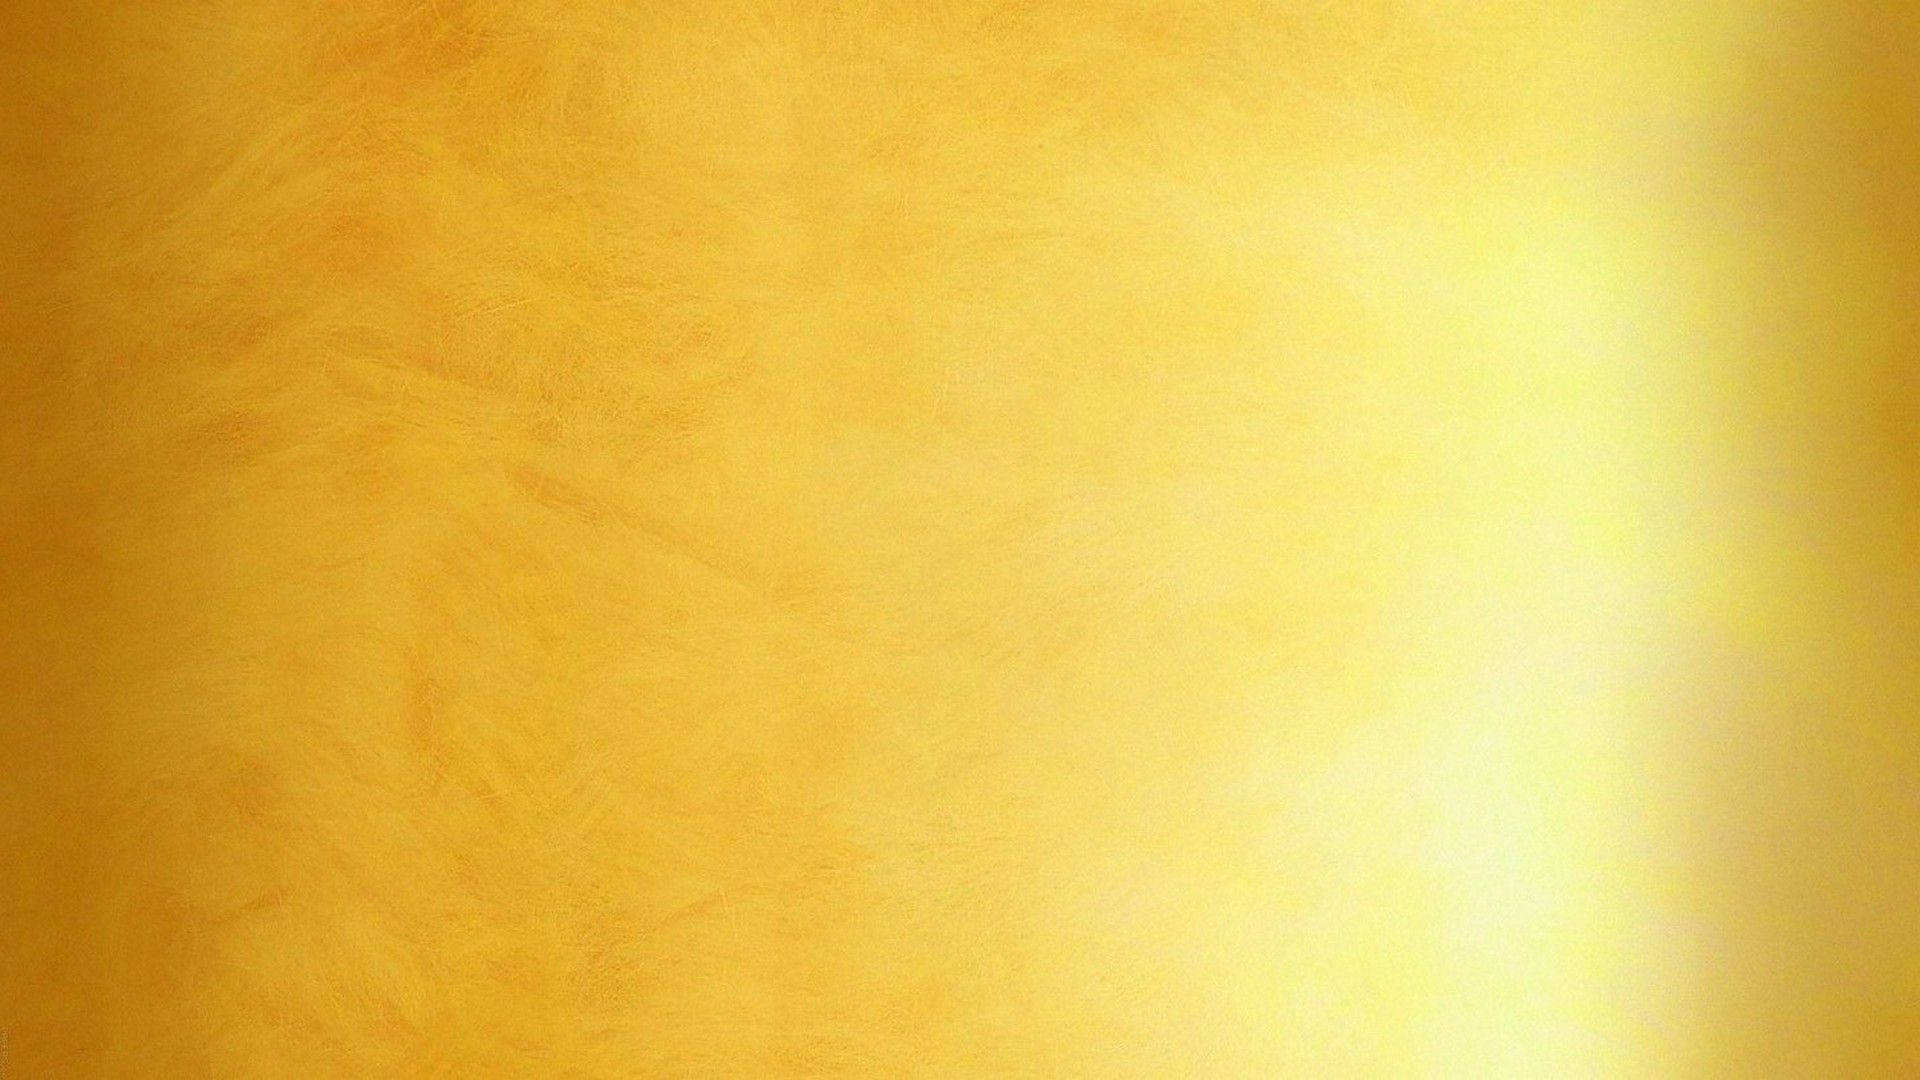 100+] Plain Gold Wallpapers 